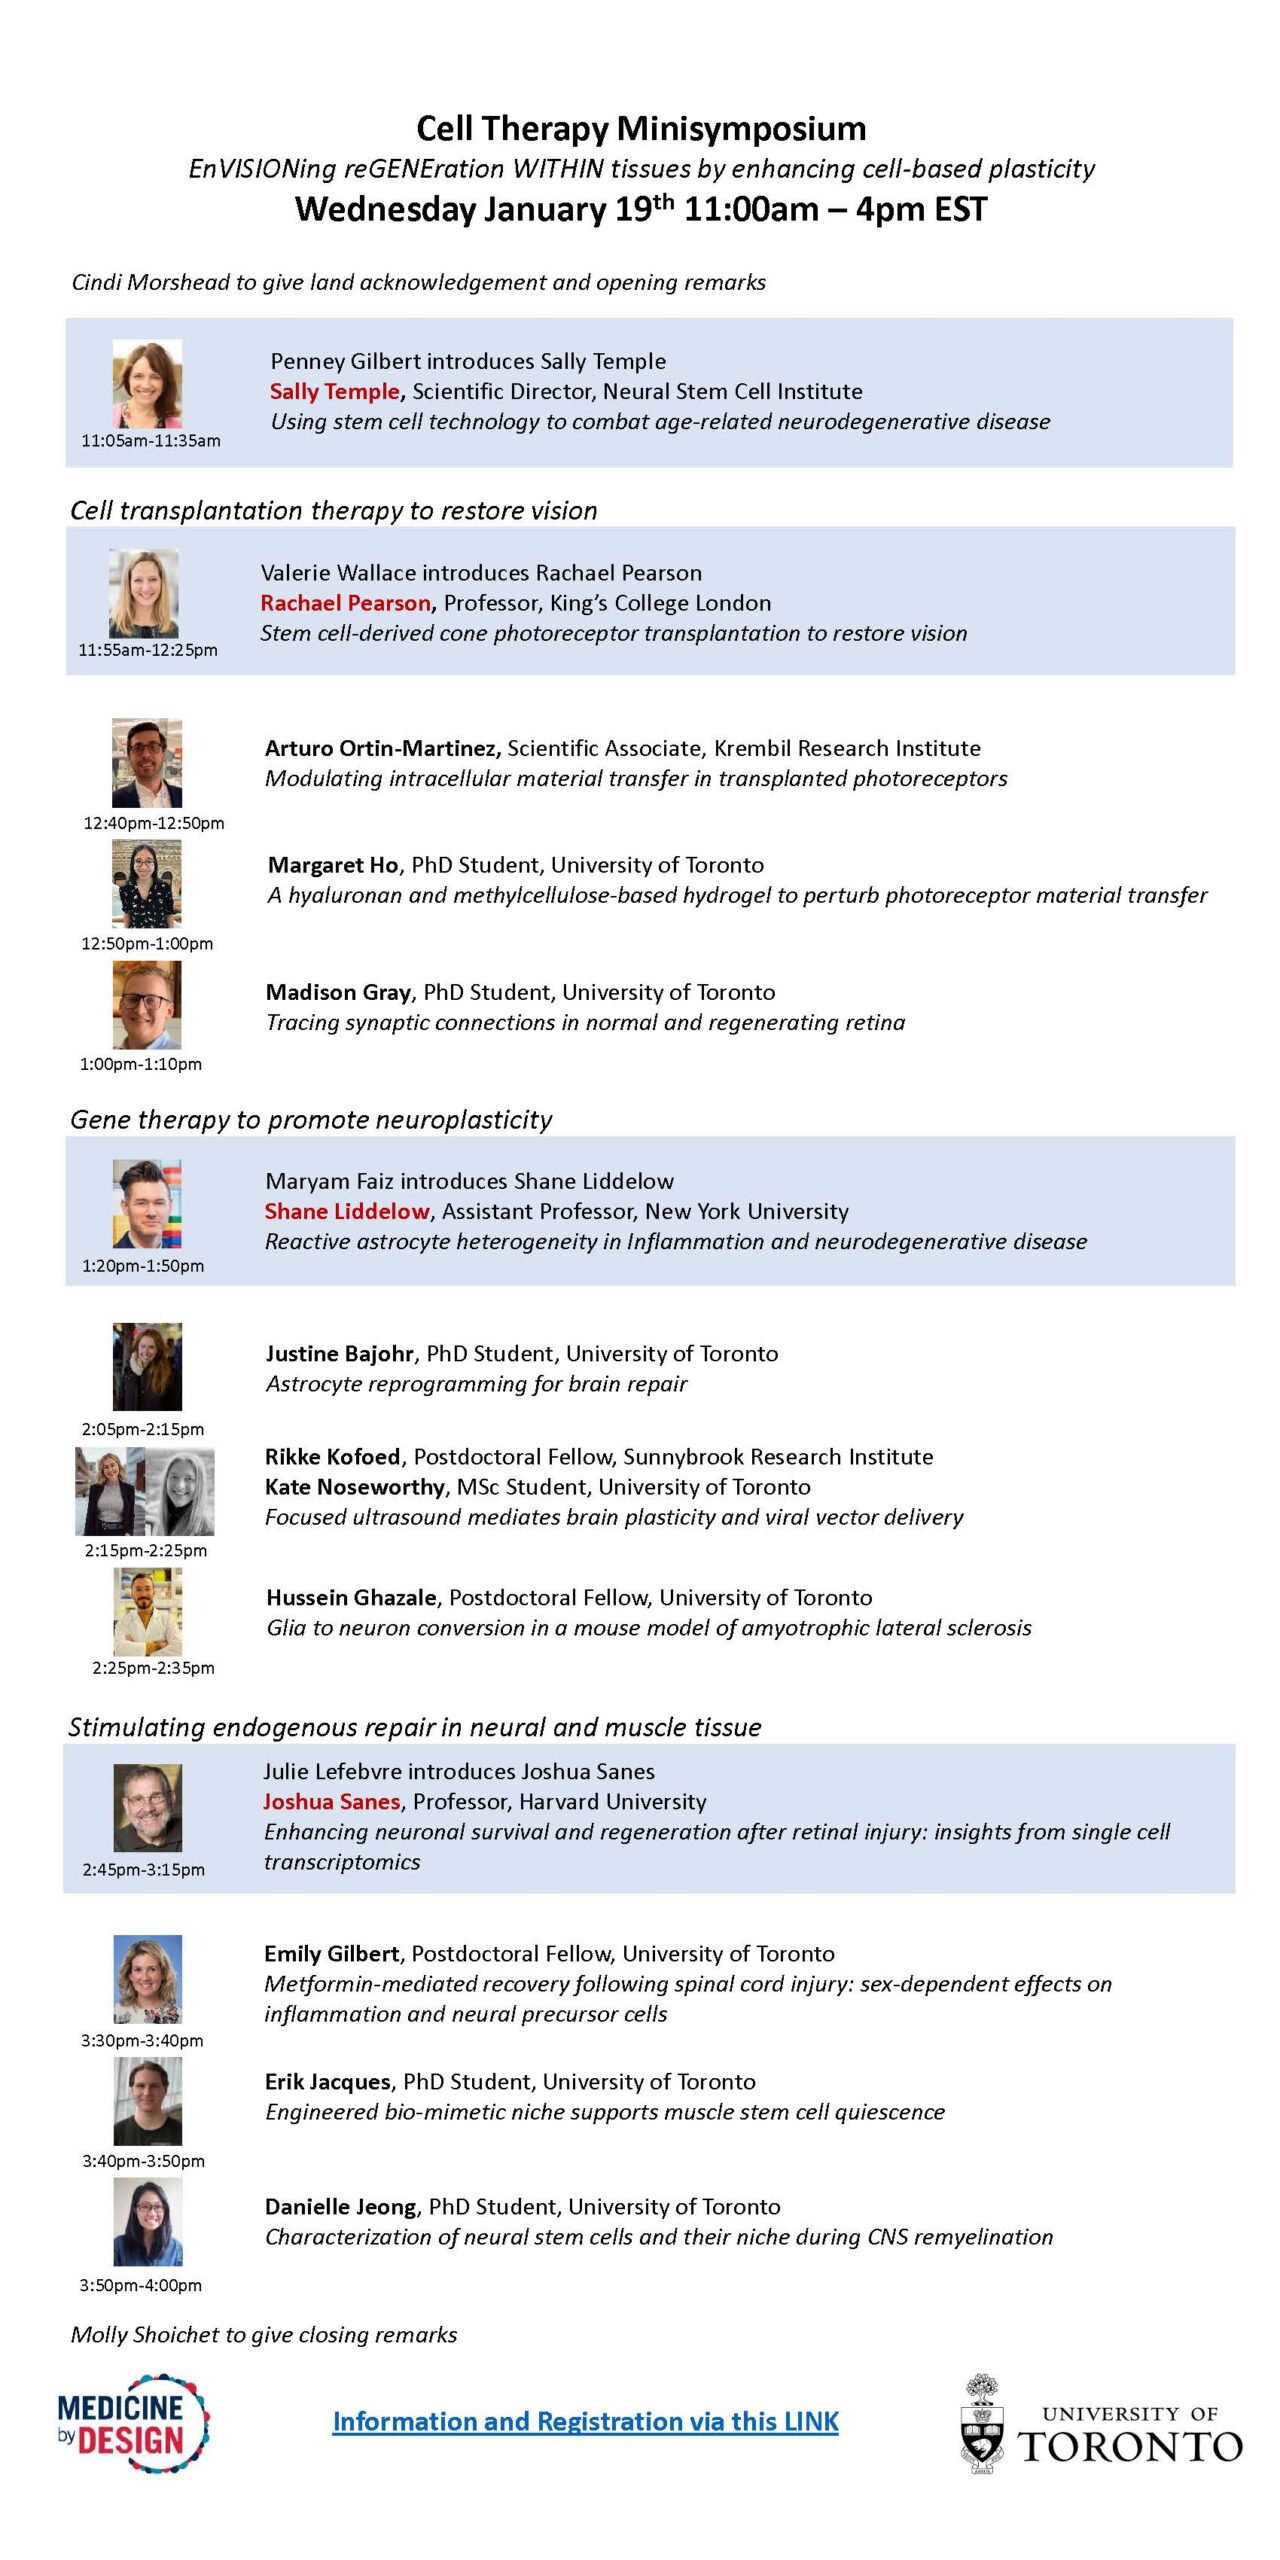 Register for the upcoming Cell Therapy Minisymposium on Wednesday January 19th @ Online